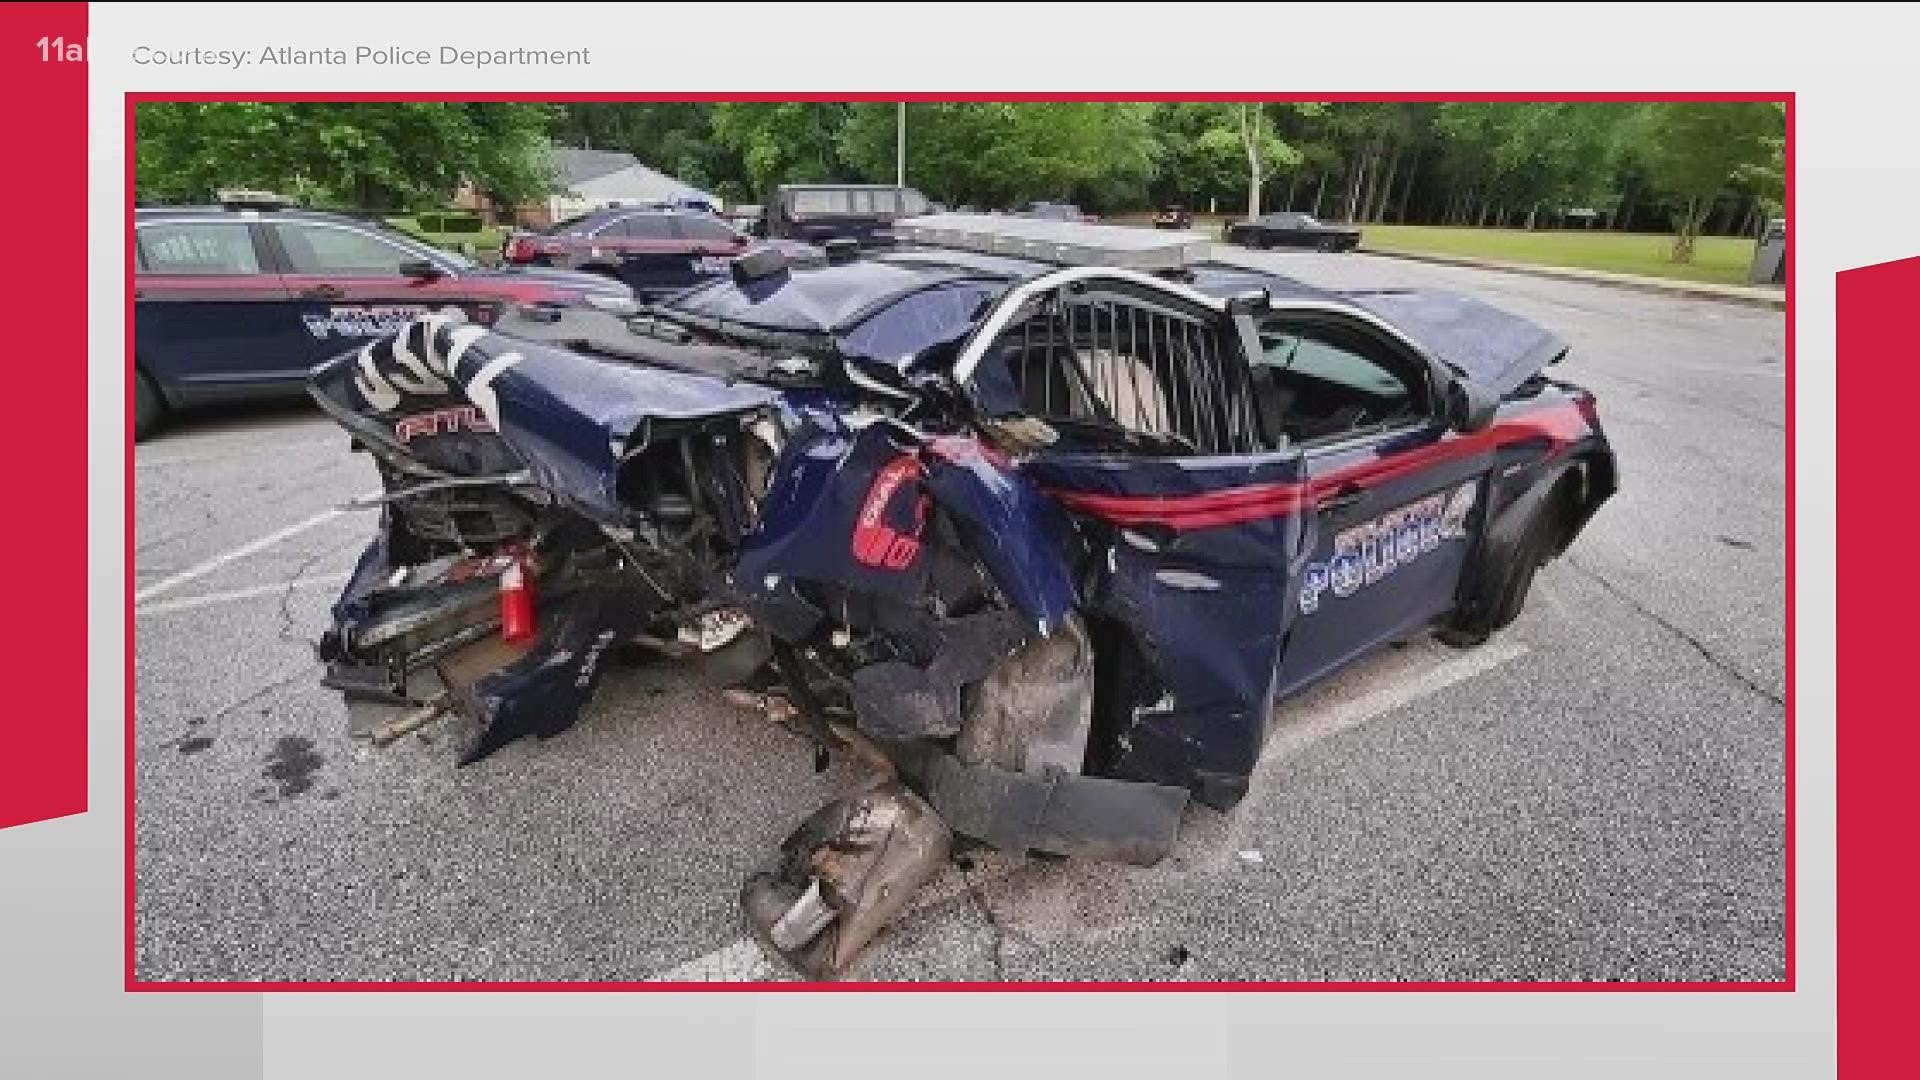 An Atlanta police officer was struck by a suspected drunk driver. Now the recovering officer has come forward to break down the harrowing experience.